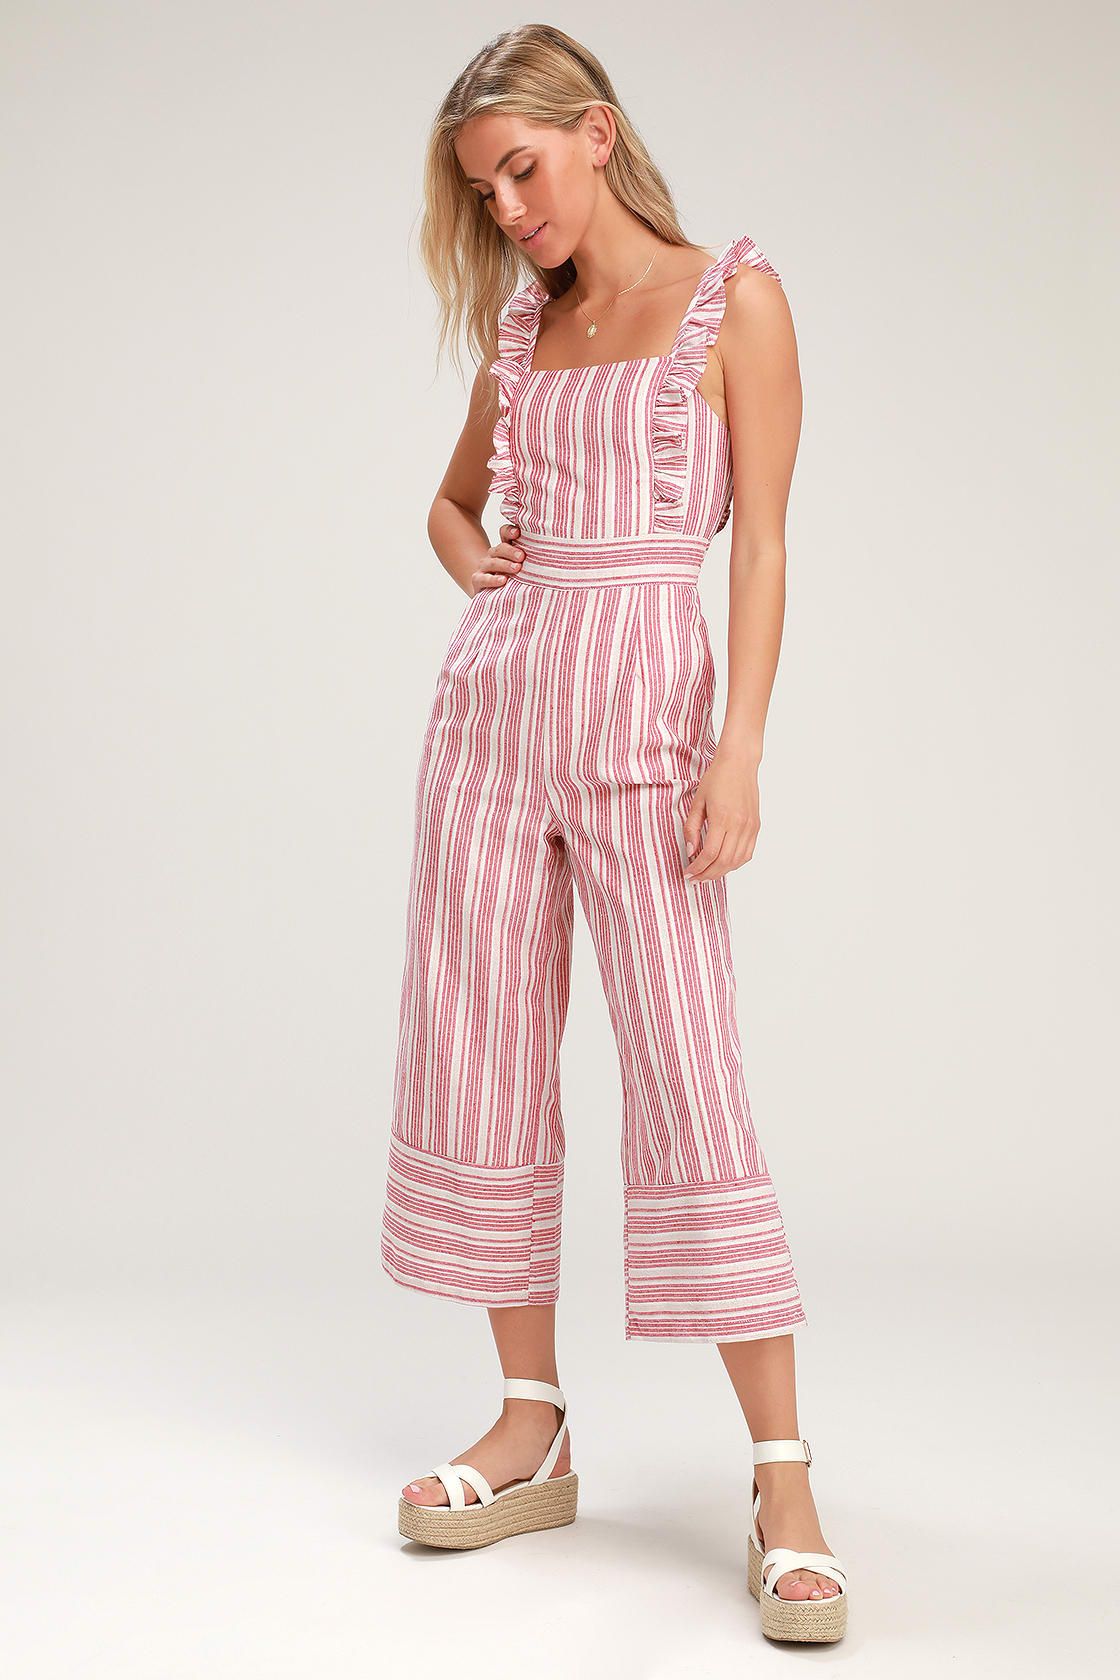 Emilia Rae White and Red Striped Ruffle Culotte Jumpsuit | Lulus